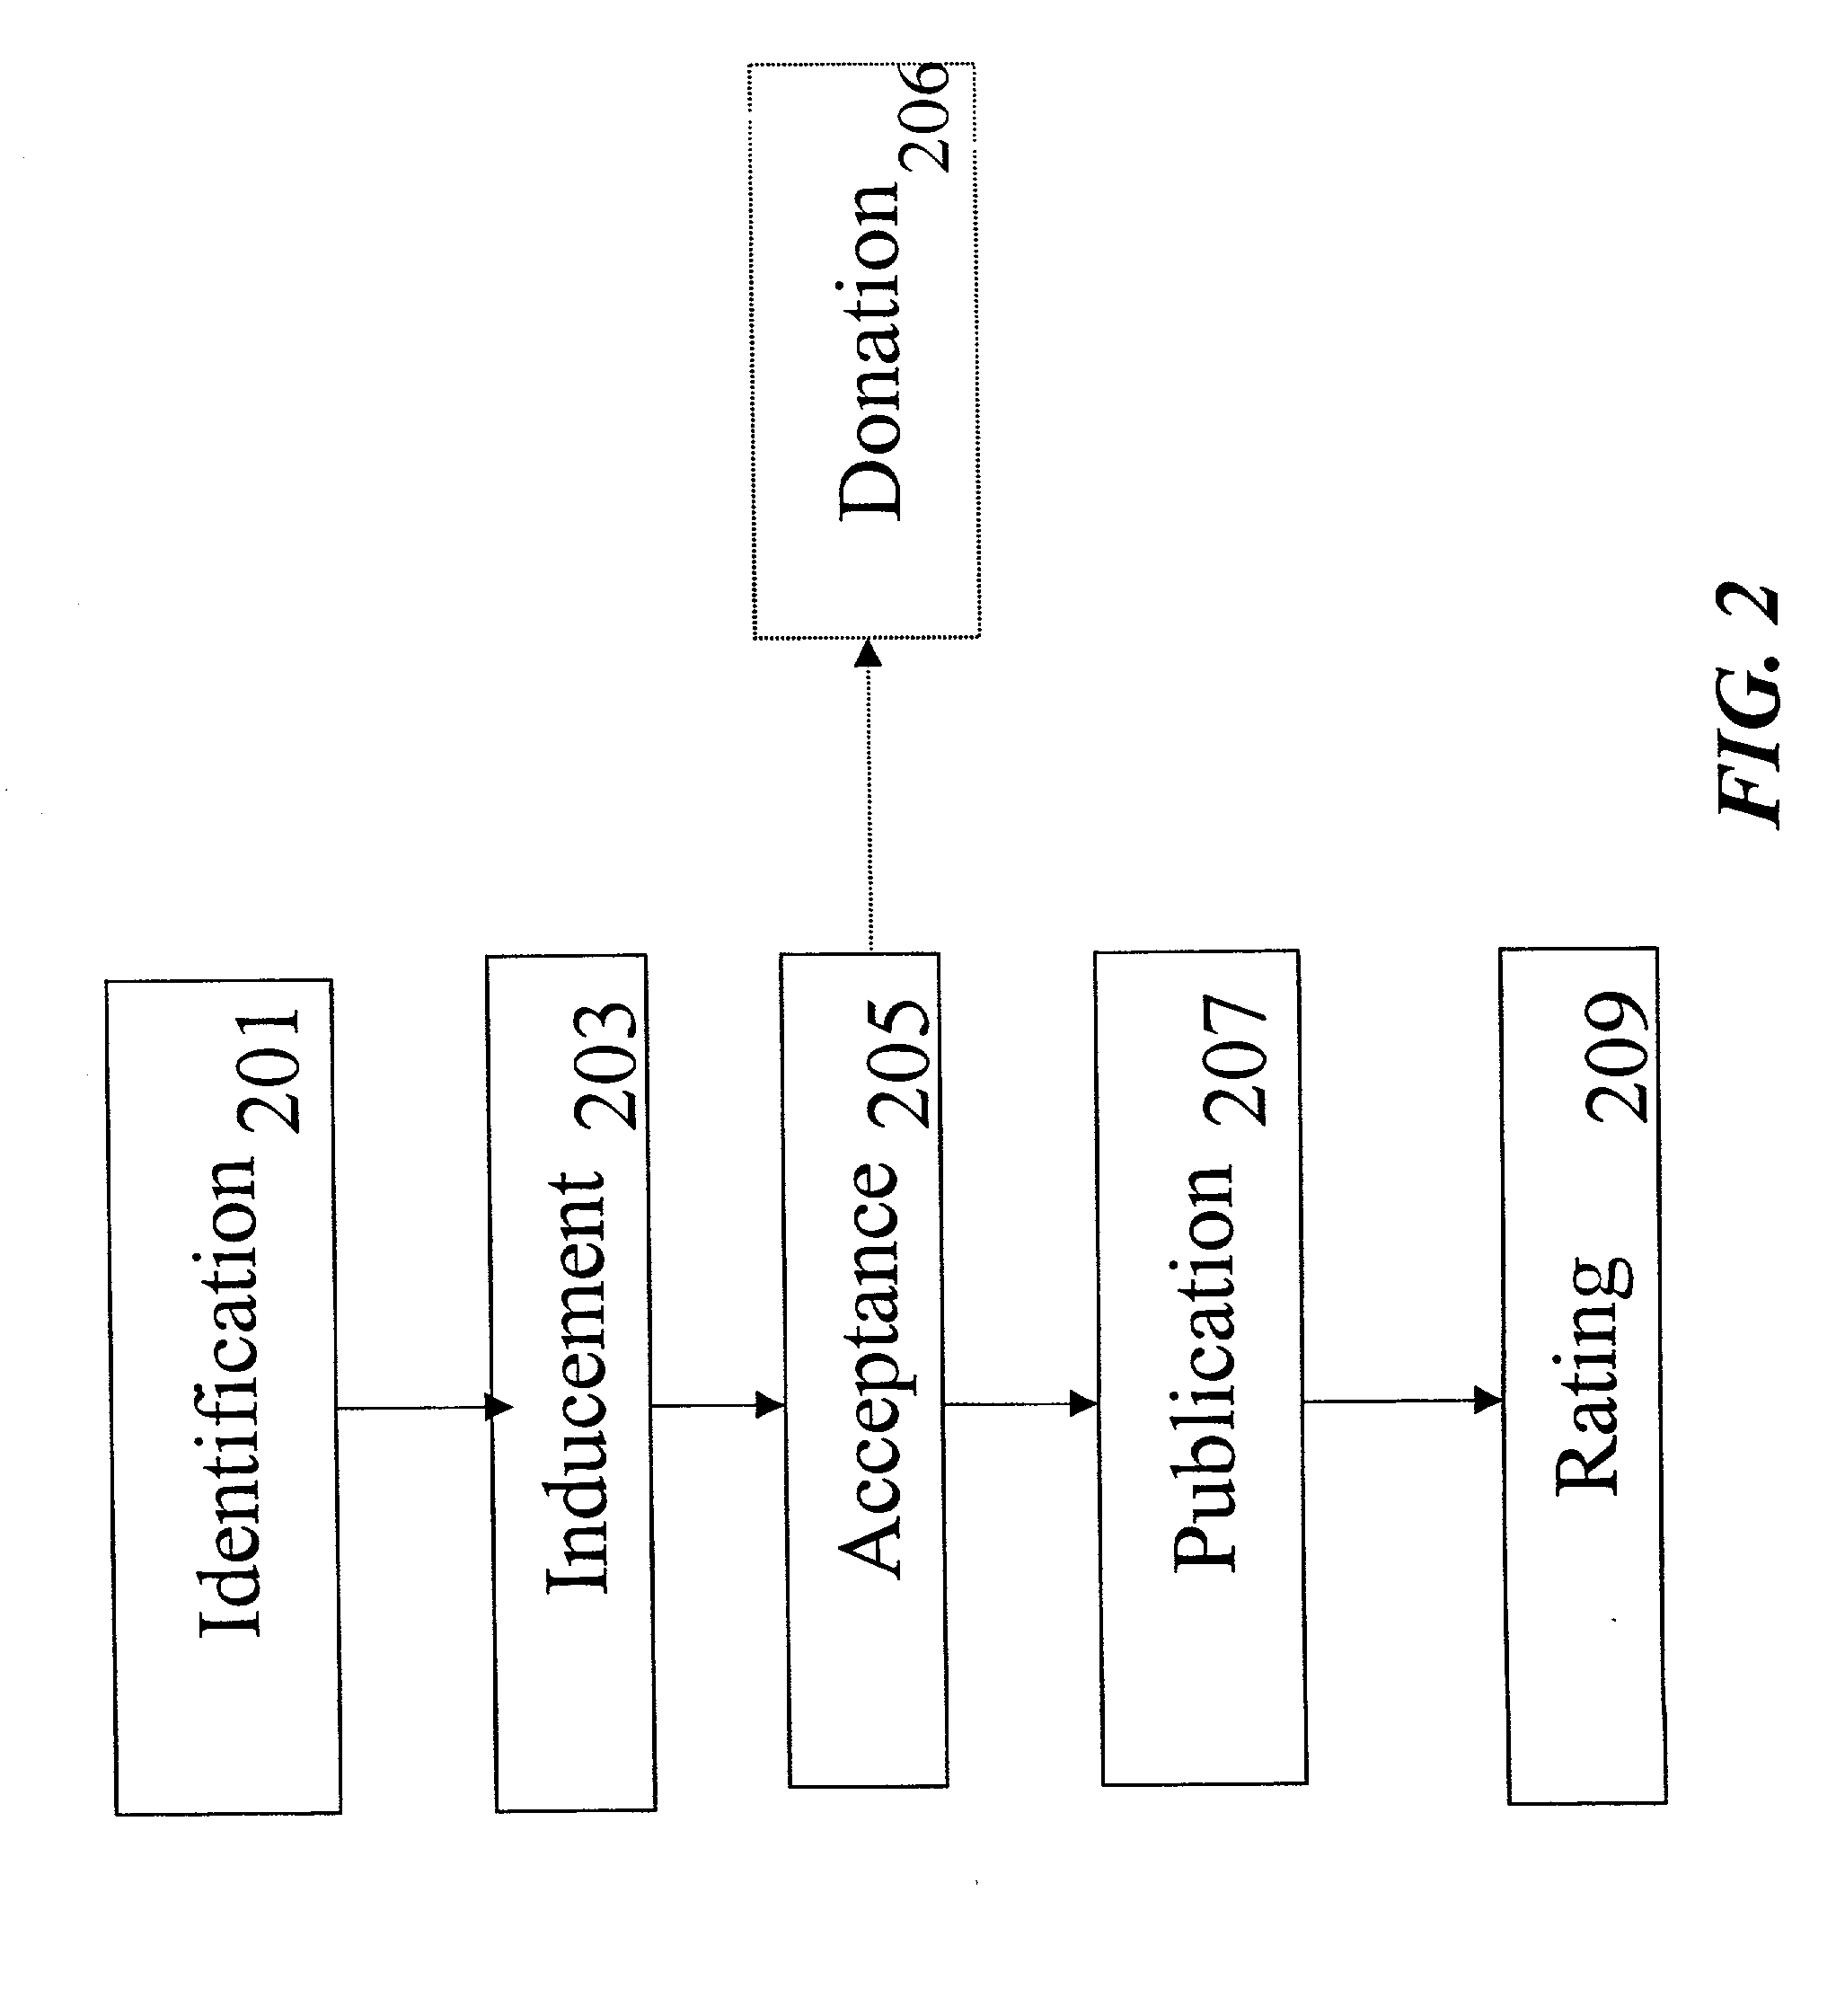 Method and apparatus for generating and distributing creative works